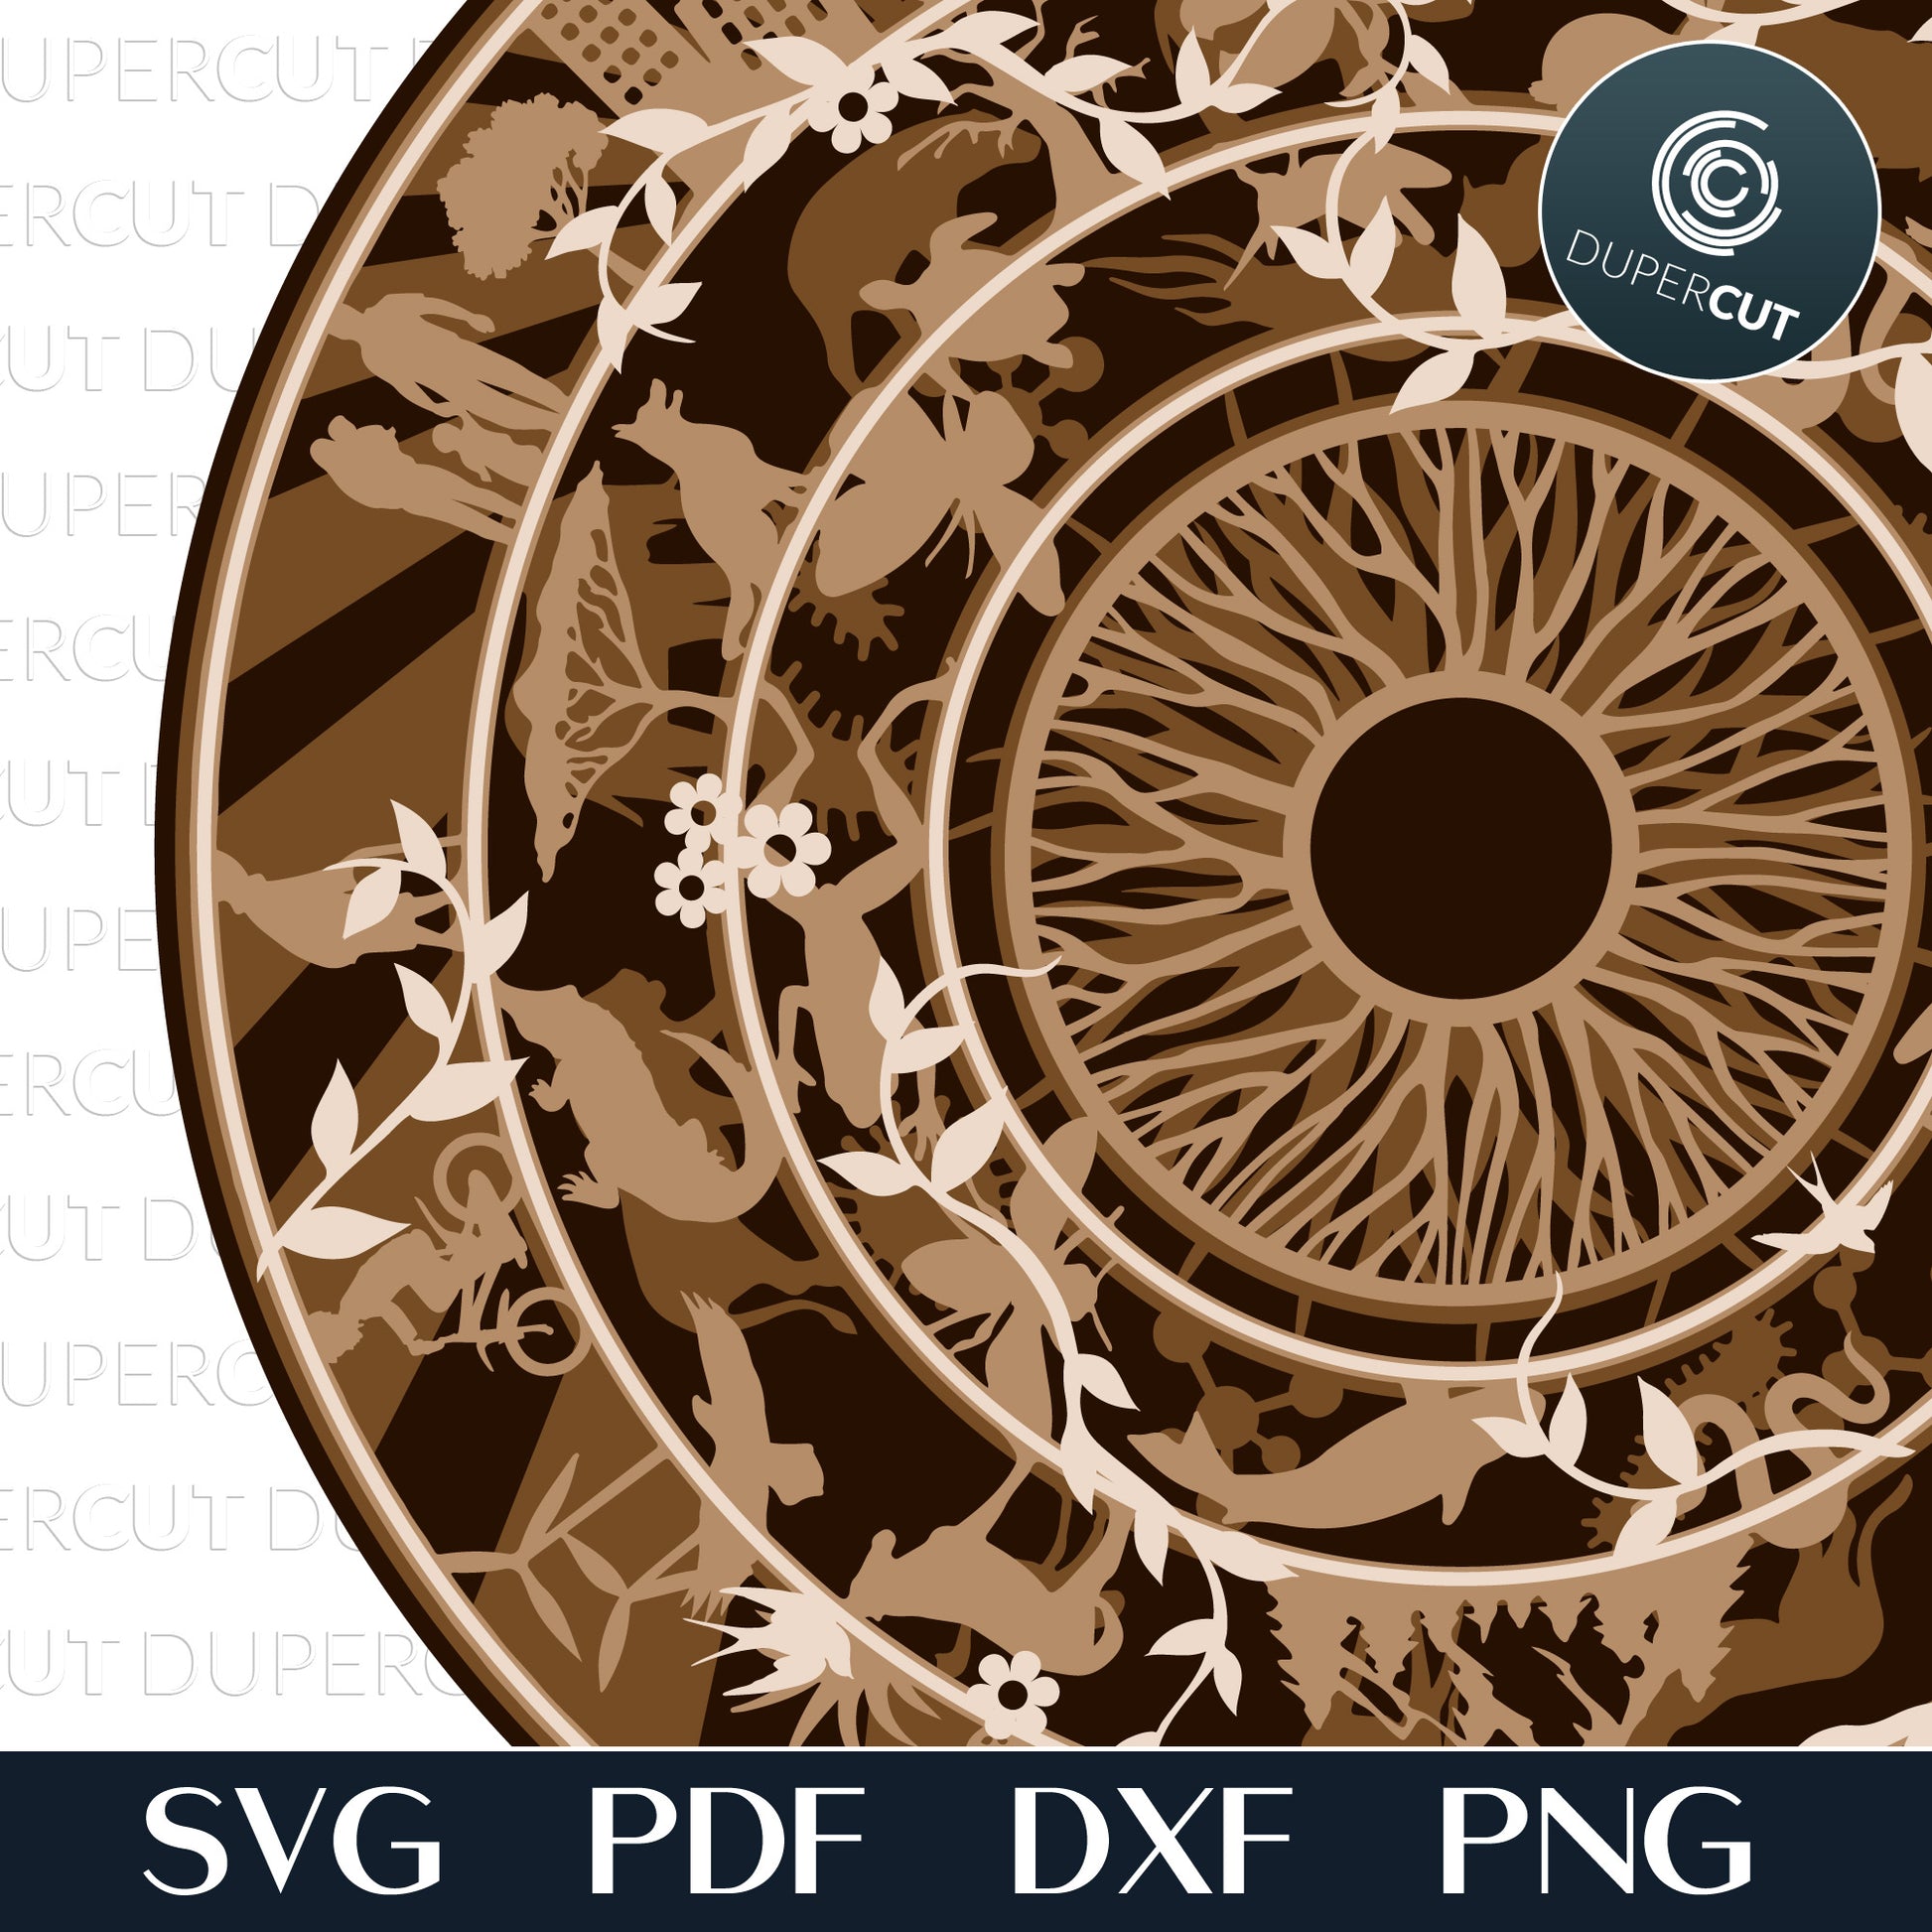 Abstract wall decoration - Earth population biosphere - multi layer cutting files - SVG PDF DXF vector template for laser machines Glowforge, Cricut, Silhouette, CNC Plasma